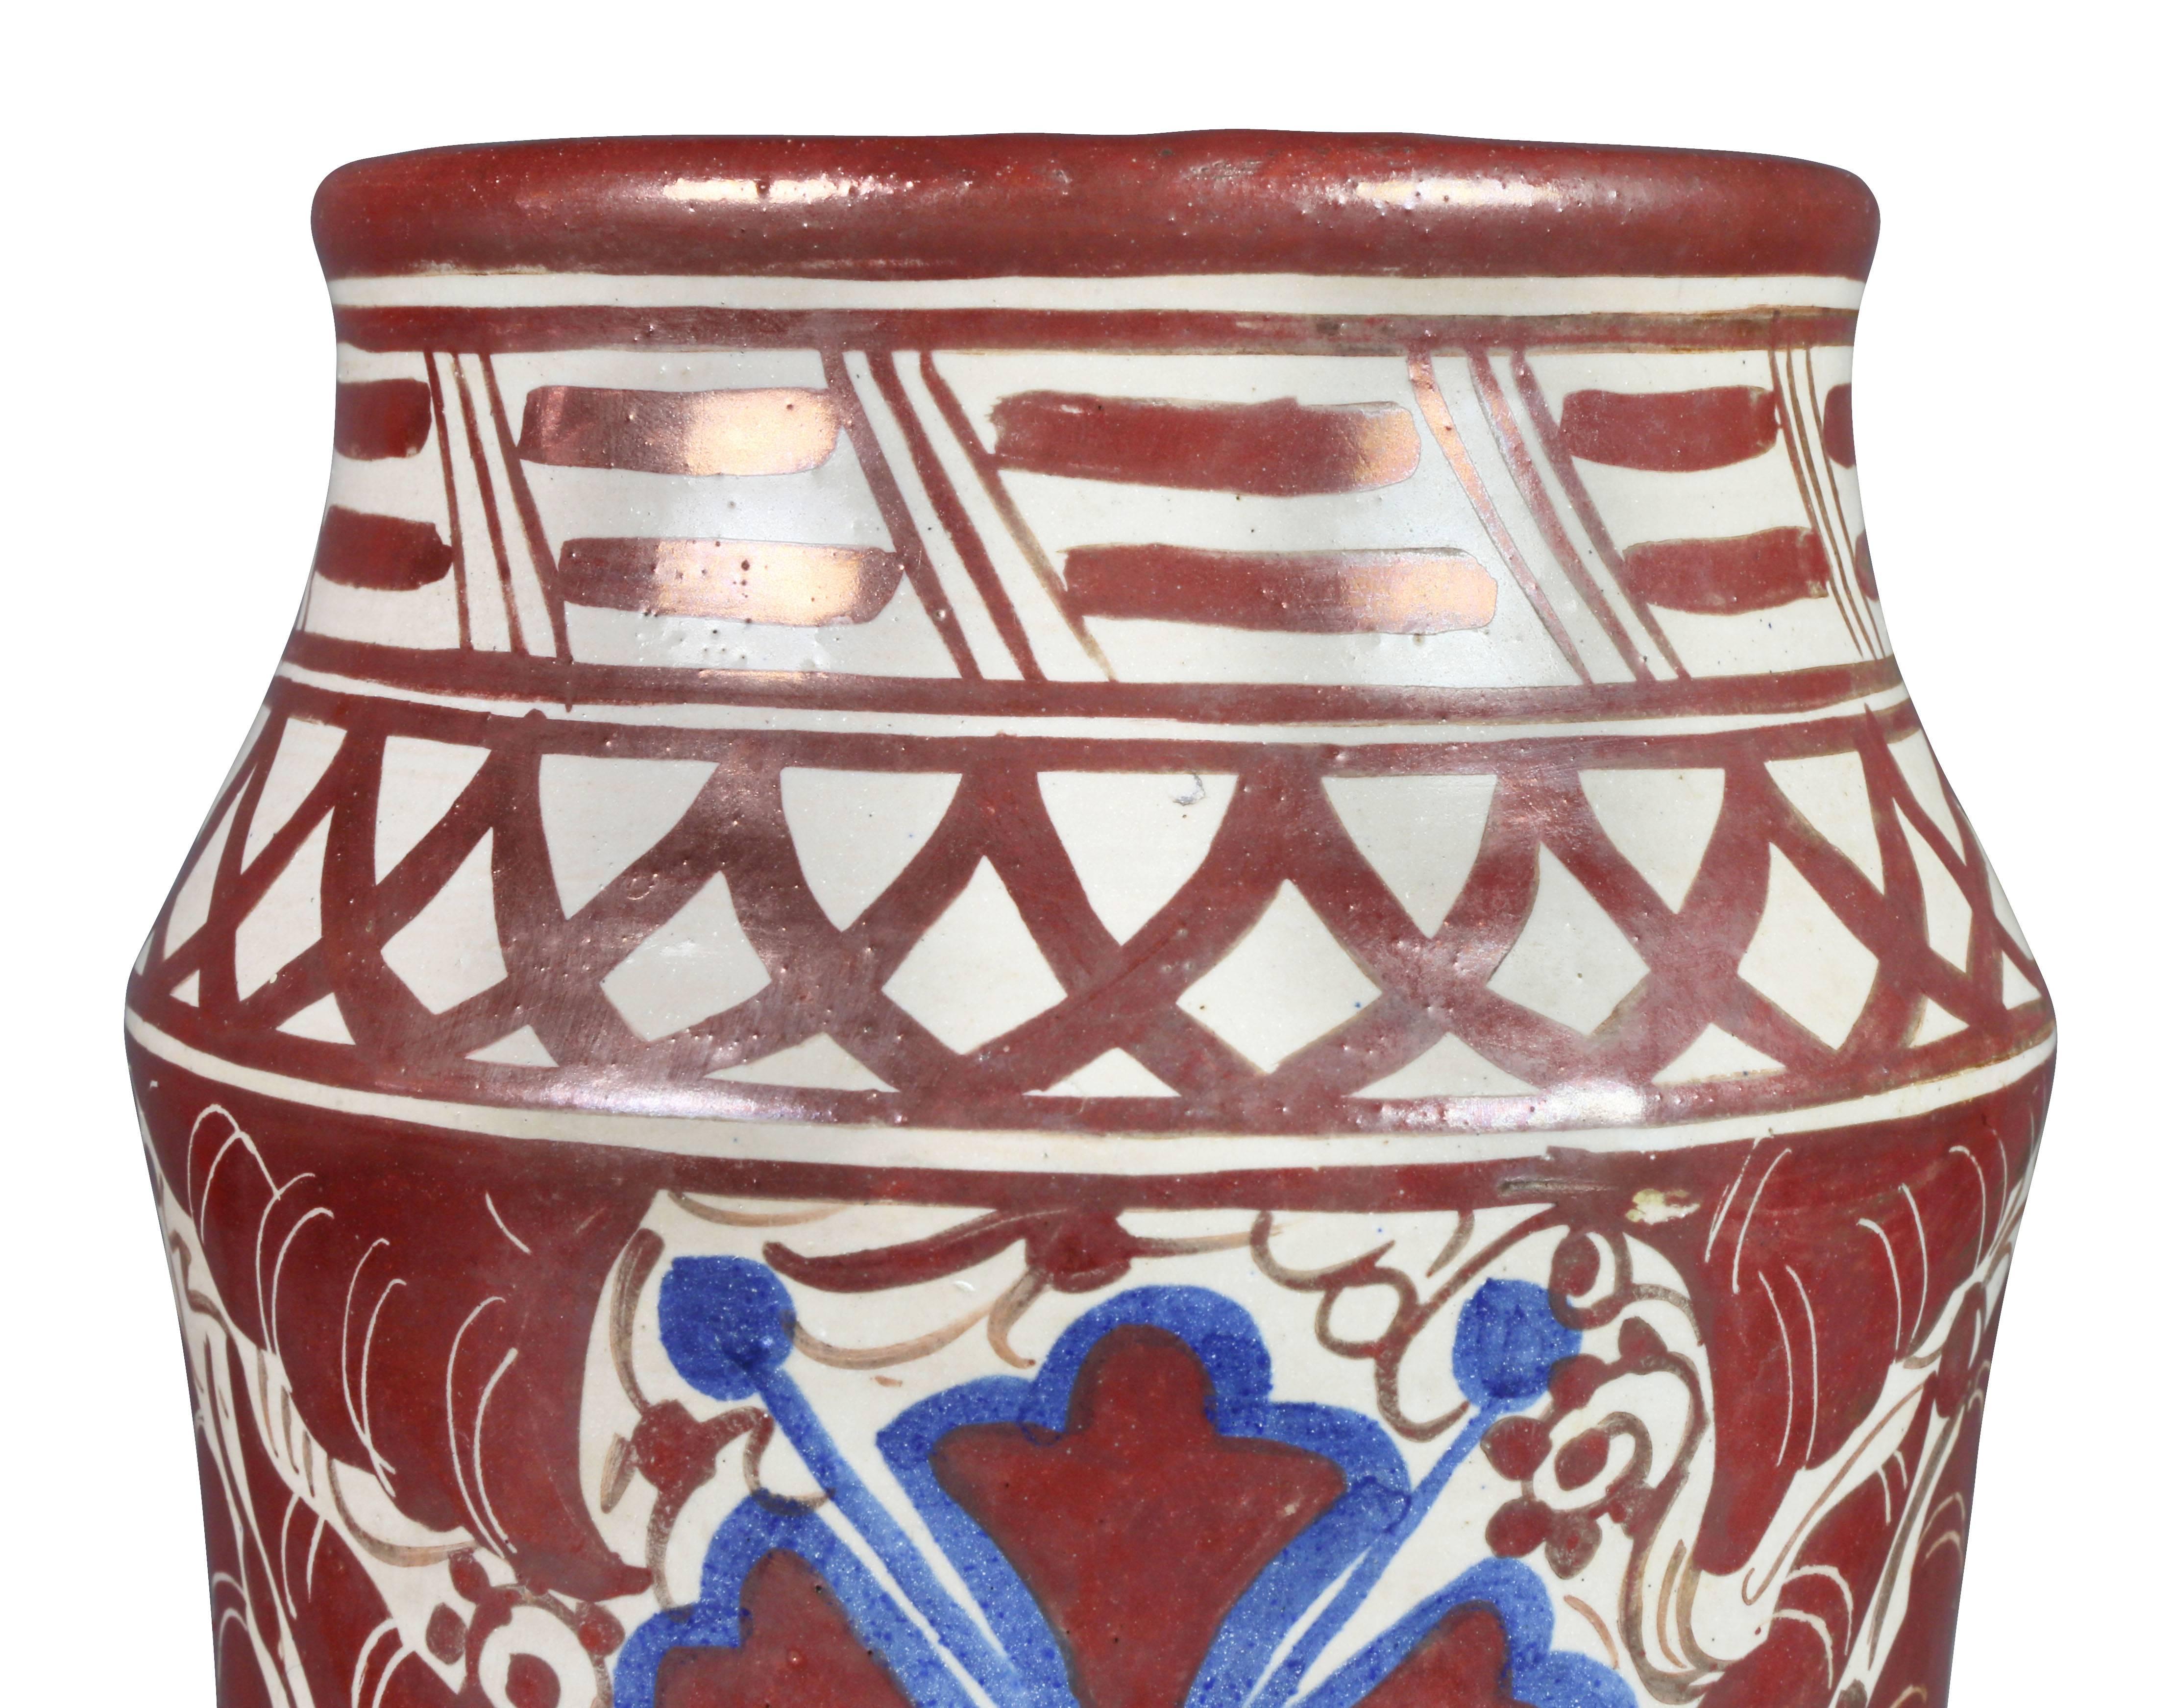 Tall drug jar form with copper red and navy blue decoration on a crème ground. Signed LC in a keyhole shaped cartouche.